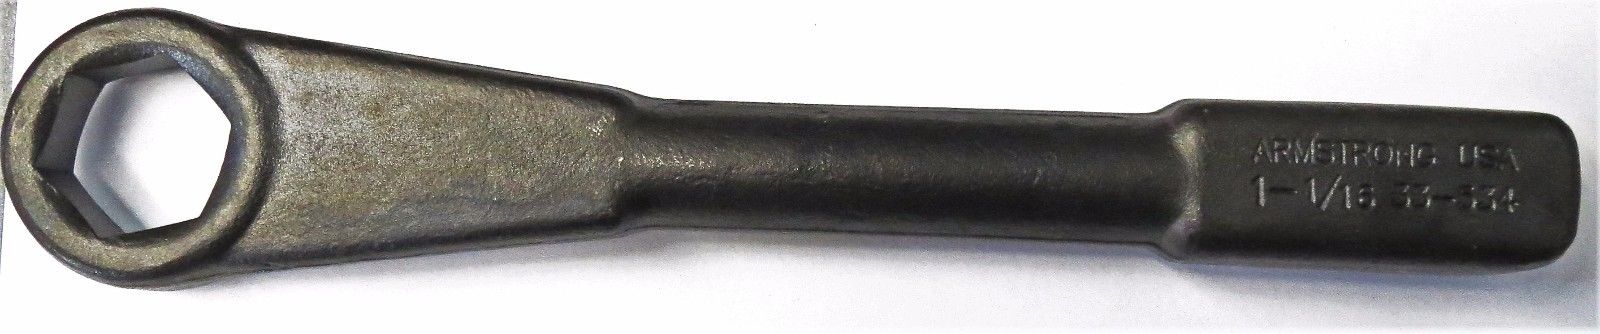 Armstrong 33-534 Striking Wrench 6 Point 1-1/16 HD  USA